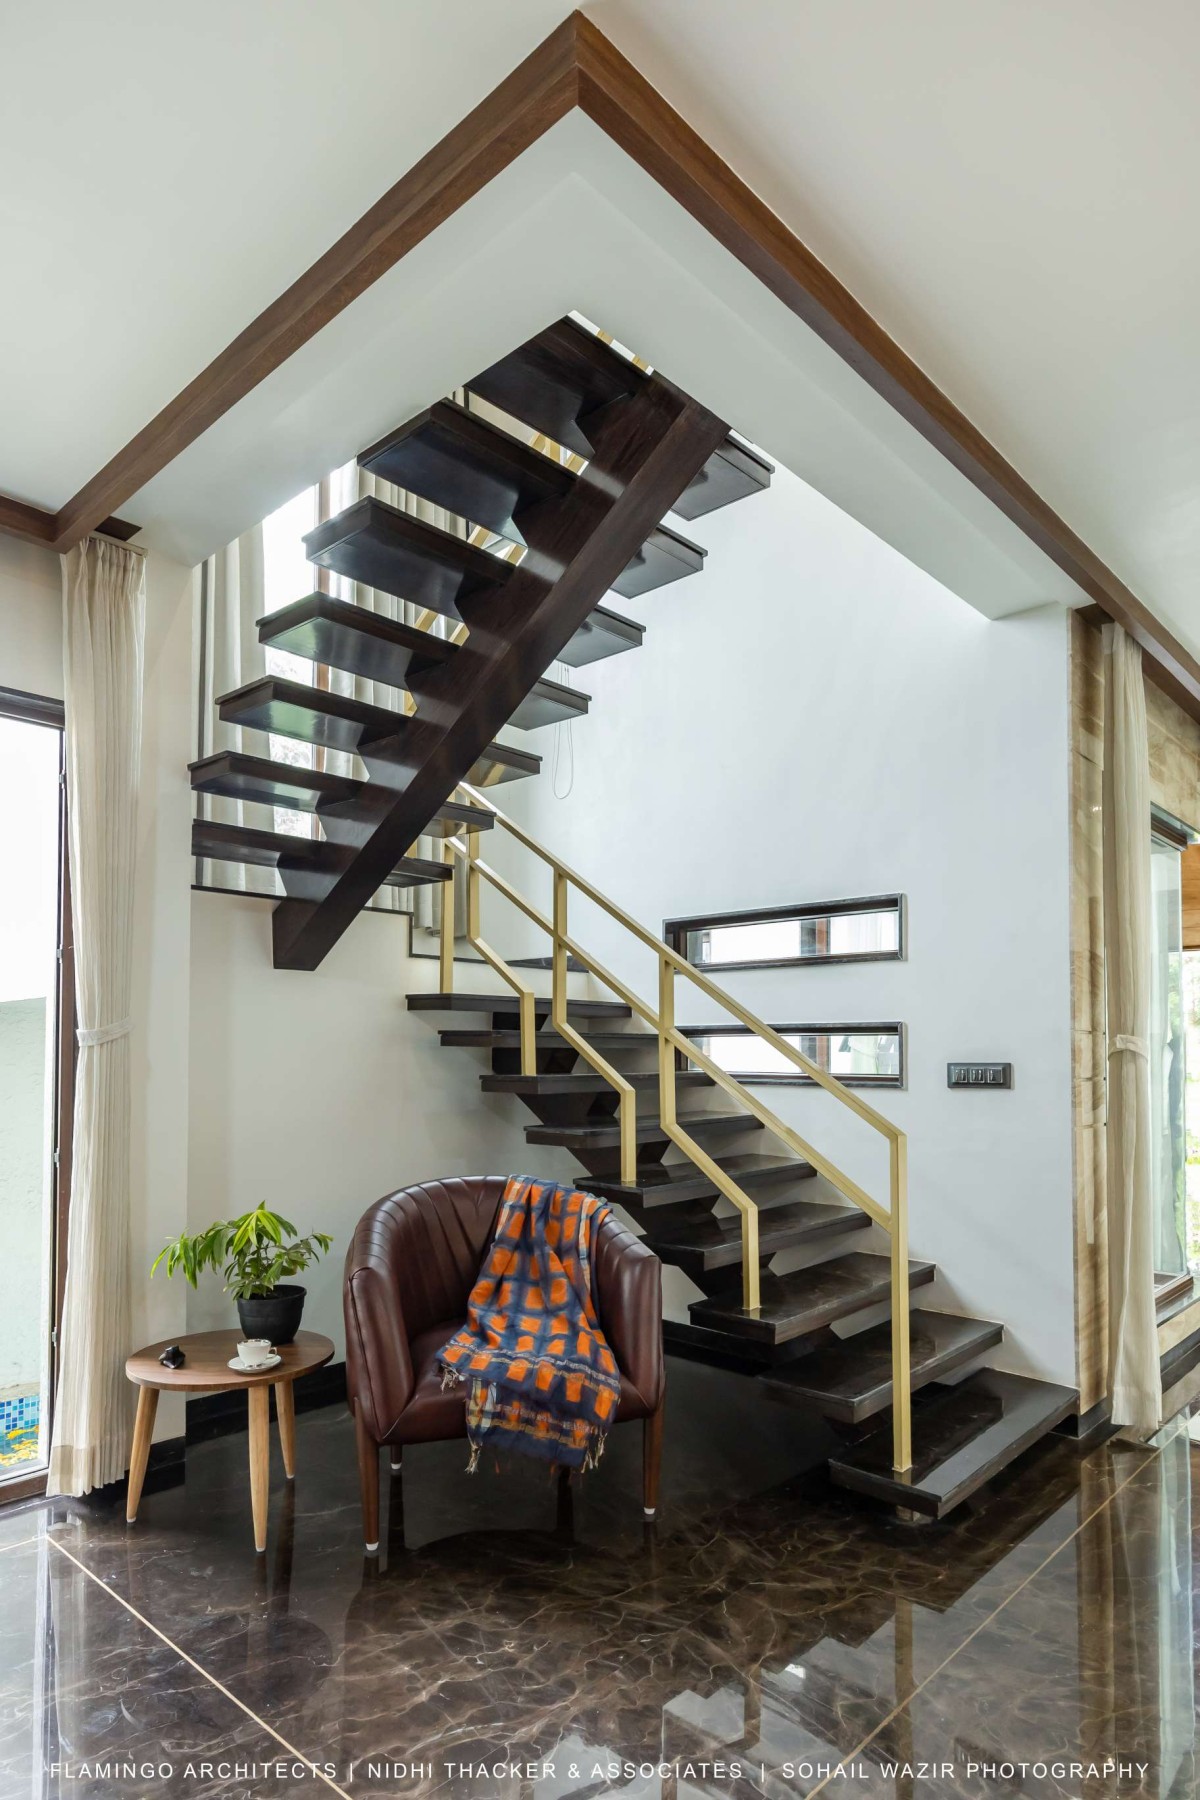 Staircase of Pujara House by Flamingo Architects + Nidhi Thacker and Associates